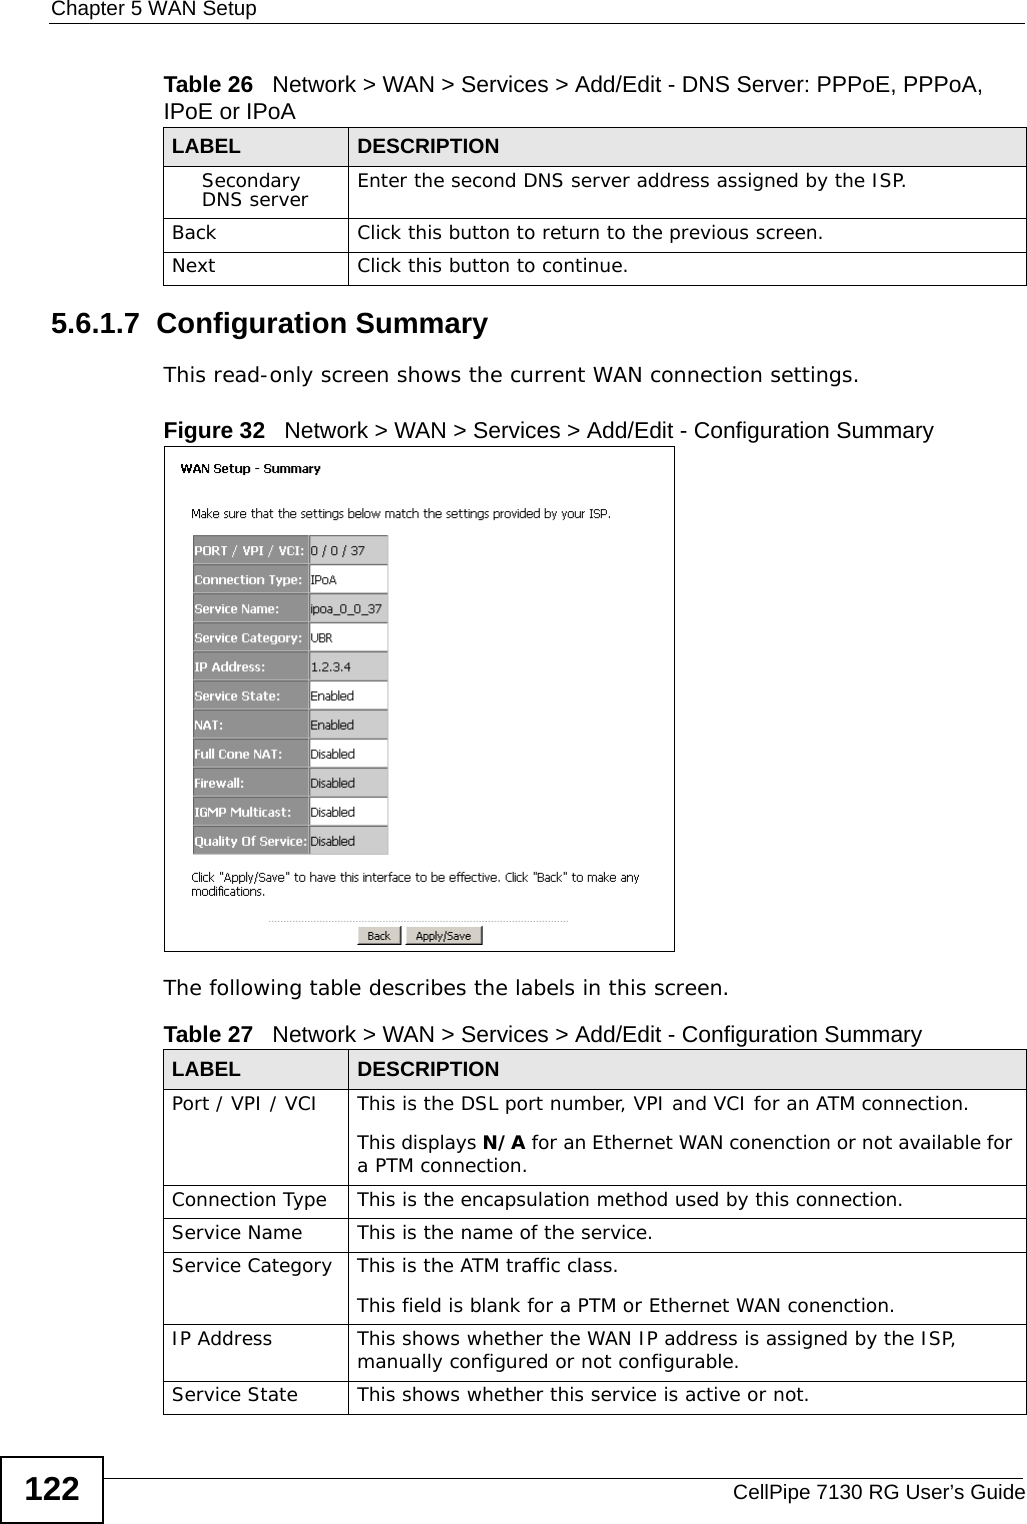 Chapter 5 WAN SetupCellPipe 7130 RG User’s Guide1225.6.1.7  Configuration SummaryThis read-only screen shows the current WAN connection settings.Figure 32   Network &gt; WAN &gt; Services &gt; Add/Edit - Configuration SummaryThe following table describes the labels in this screen. Secondary DNS server Enter the second DNS server address assigned by the ISP.Back Click this button to return to the previous screen.Next Click this button to continue.Table 26   Network &gt; WAN &gt; Services &gt; Add/Edit - DNS Server: PPPoE, PPPoA, IPoE or IPoALABEL DESCRIPTIONTable 27   Network &gt; WAN &gt; Services &gt; Add/Edit - Configuration SummaryLABEL DESCRIPTIONPort / VPI / VCI This is the DSL port number, VPI and VCI for an ATM connection.This displays N/A for an Ethernet WAN conenction or not available for a PTM connection.Connection Type This is the encapsulation method used by this connection.Service Name This is the name of the service.Service Category This is the ATM traffic class.This field is blank for a PTM or Ethernet WAN conenction.IP Address This shows whether the WAN IP address is assigned by the ISP, manually configured or not configurable.Service State This shows whether this service is active or not.